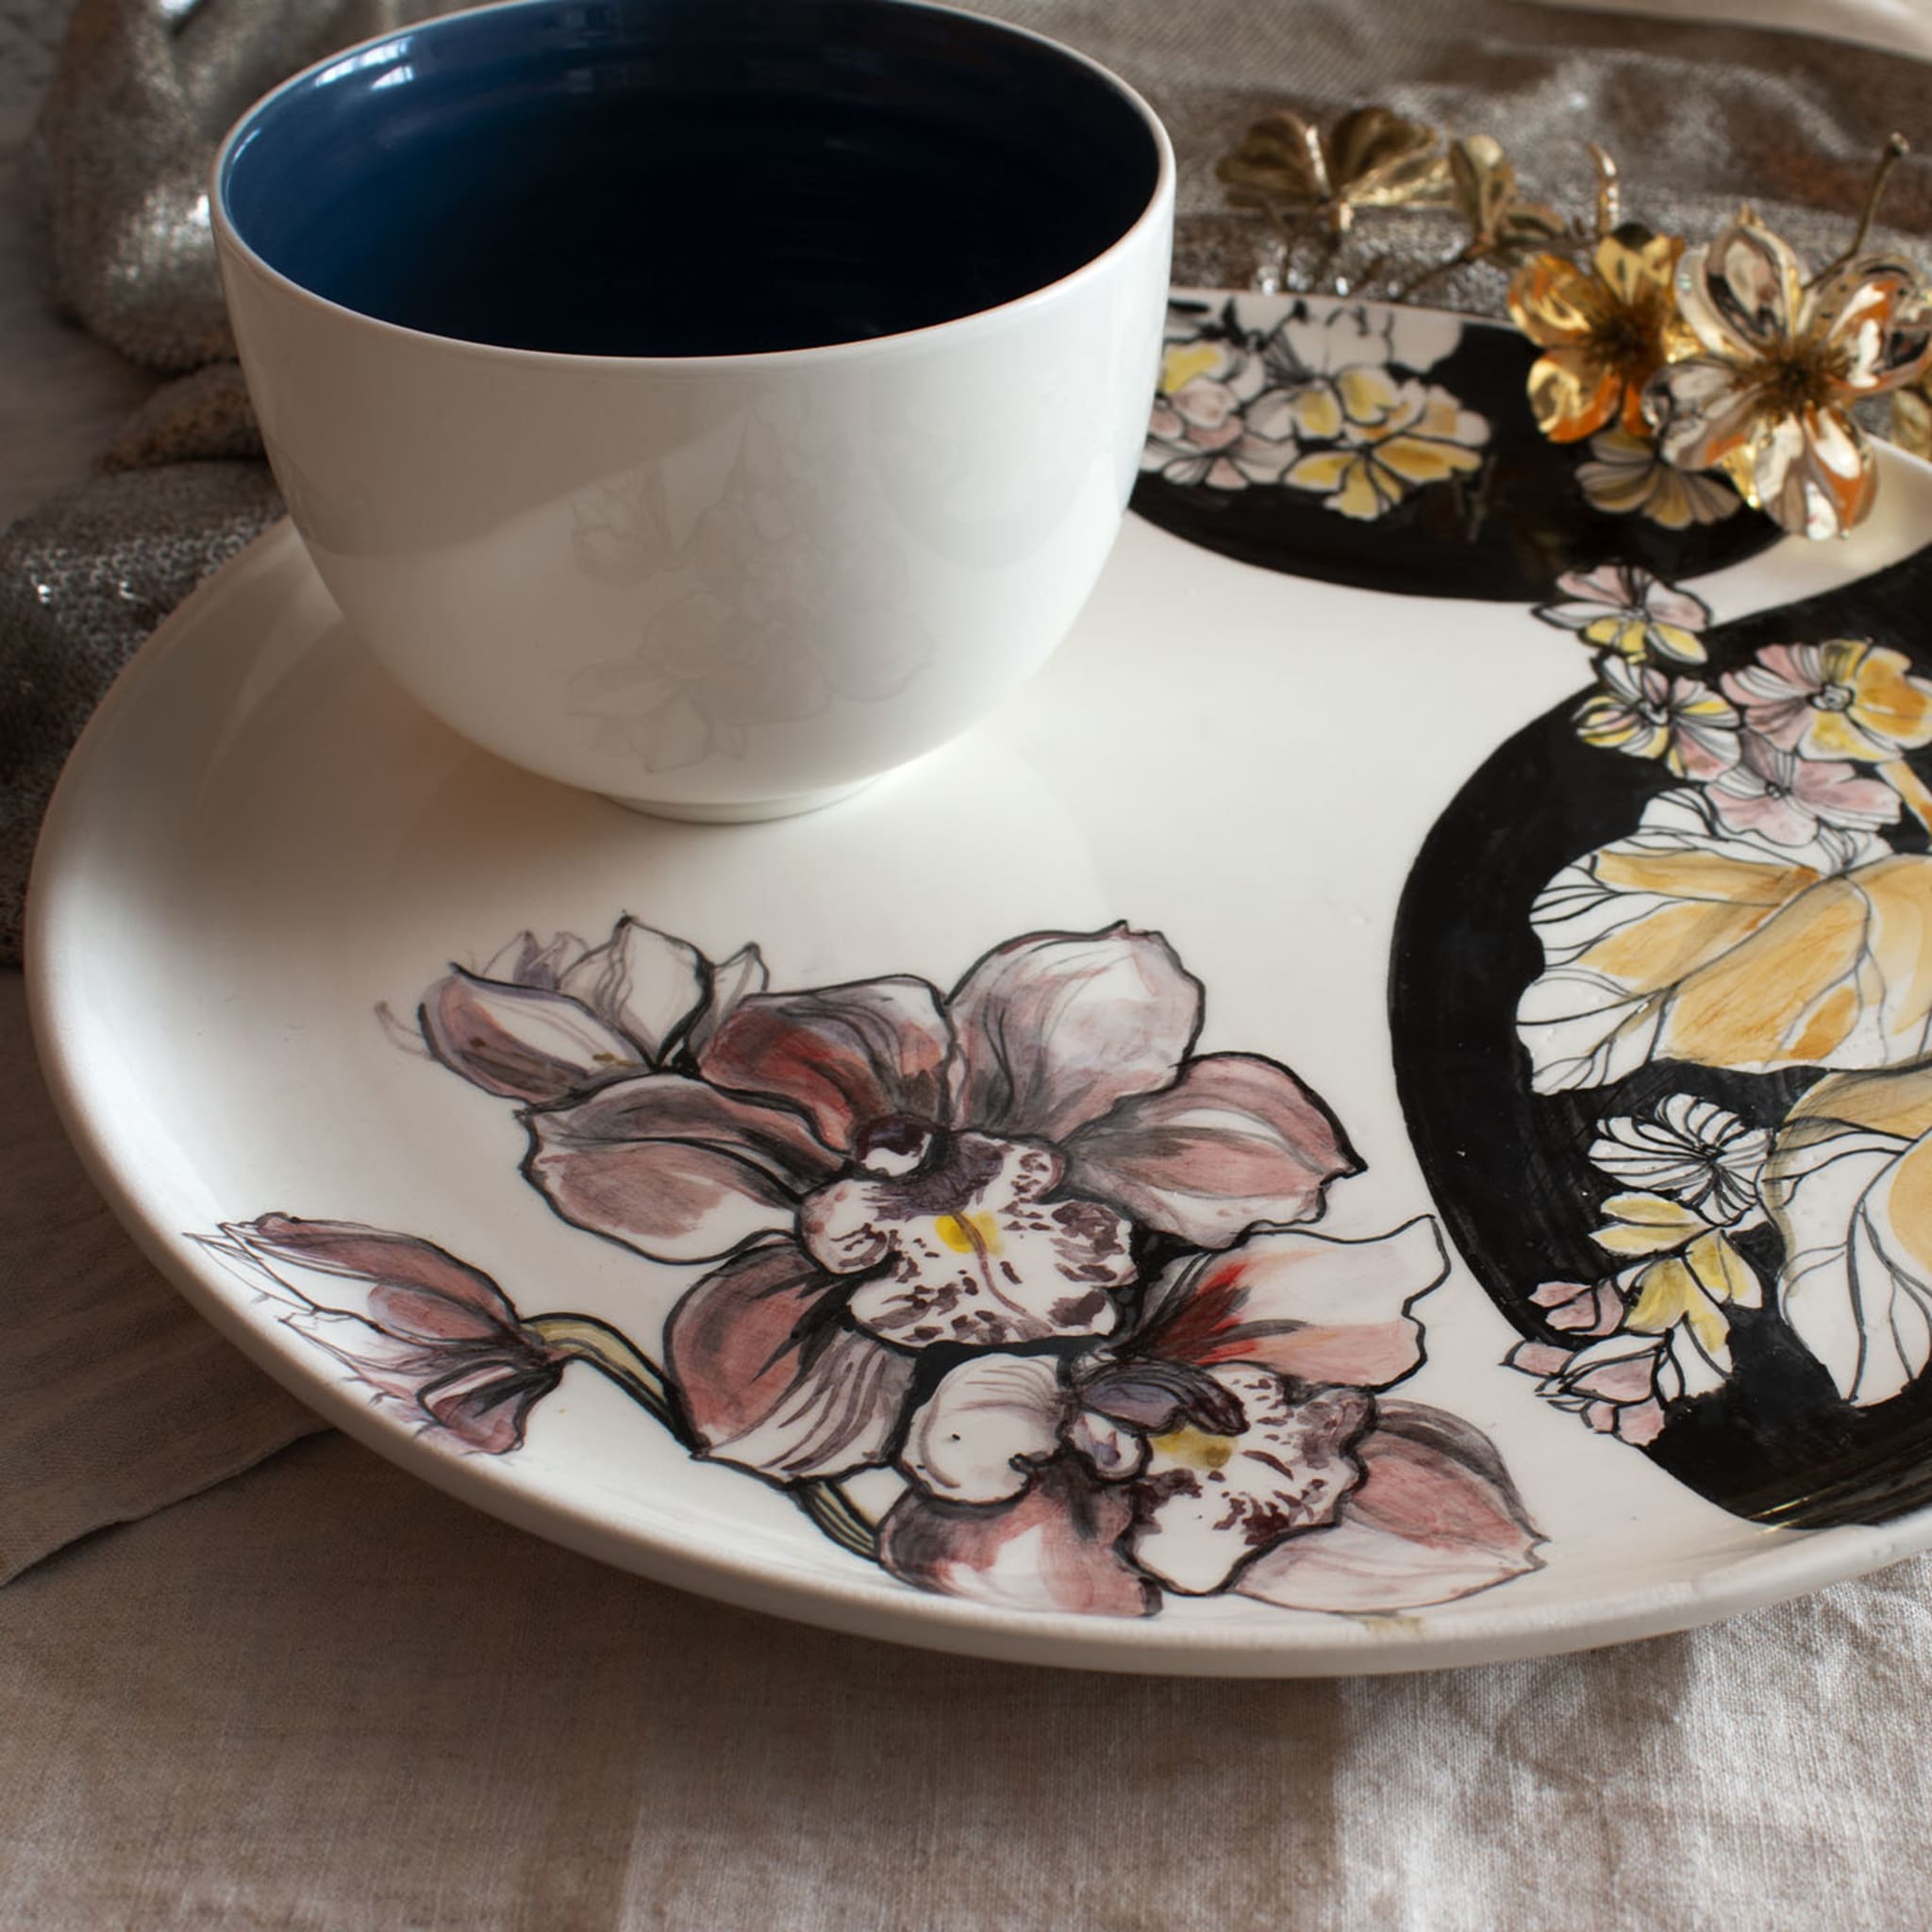 Haiku Floral Charger Plate - Alternative view 1